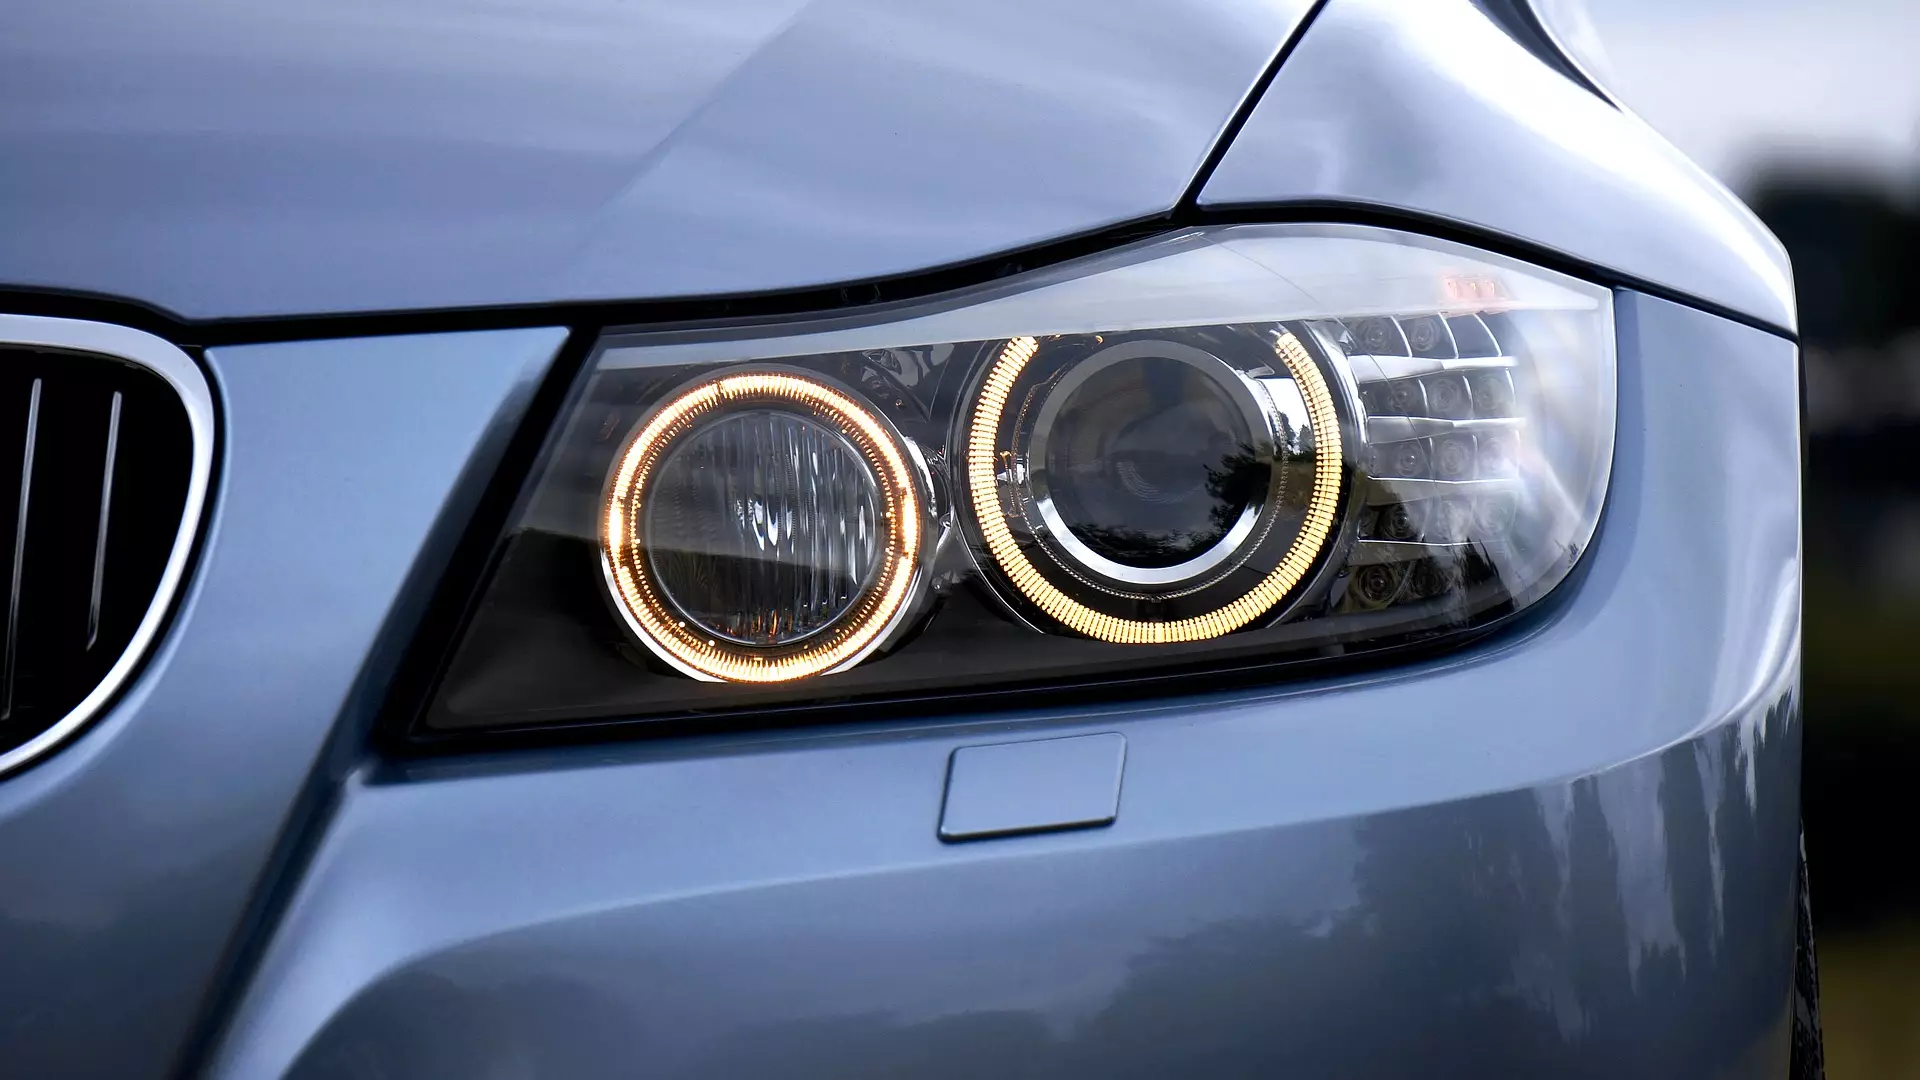 RAC Warns That Headlights Are Dangerously Bright On New Cars